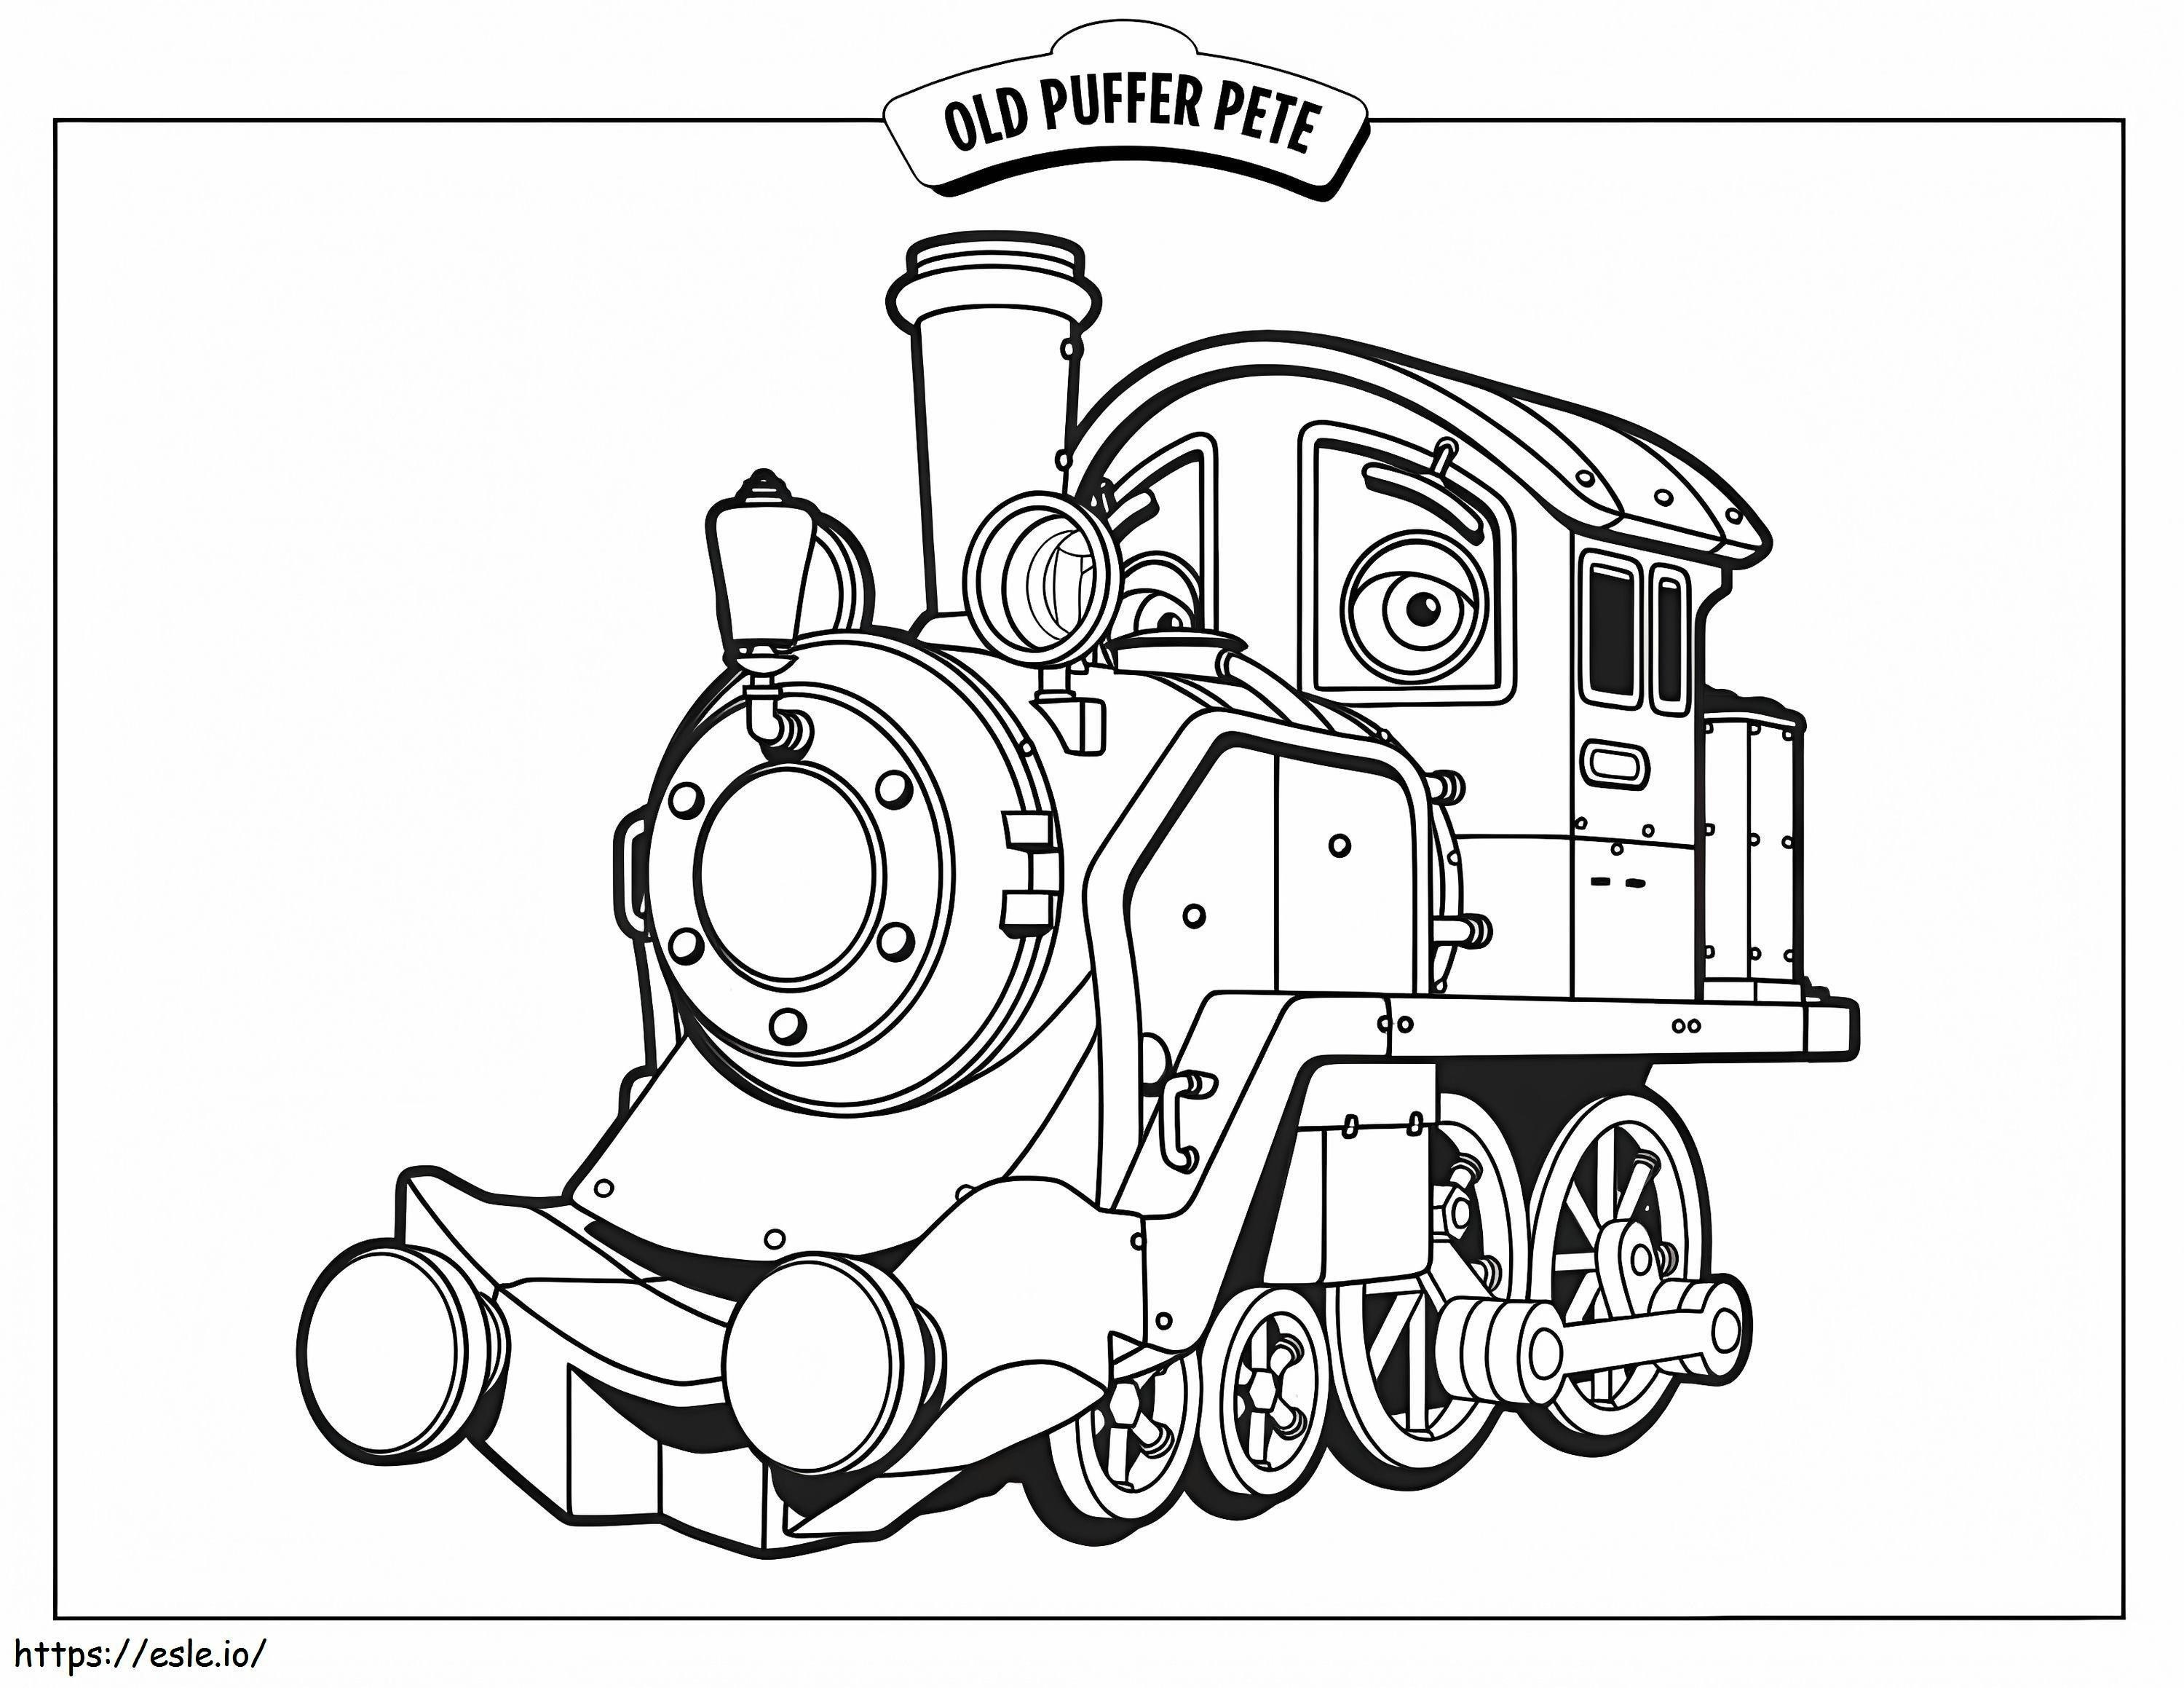 Old Puffer Pete coloring page